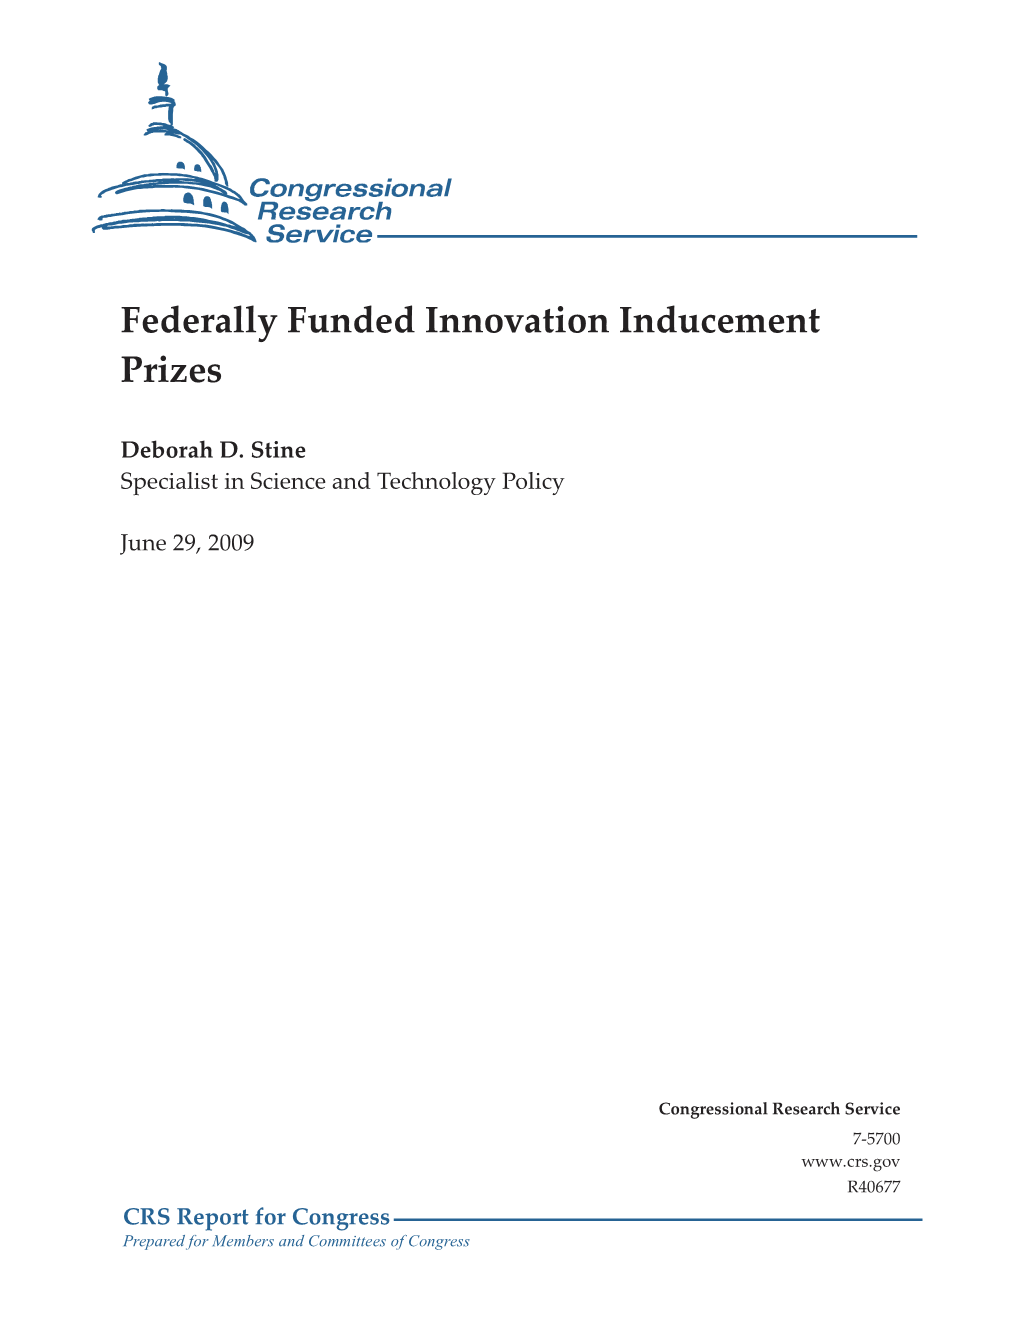 Federally Funded Innovation Inducement Prizes